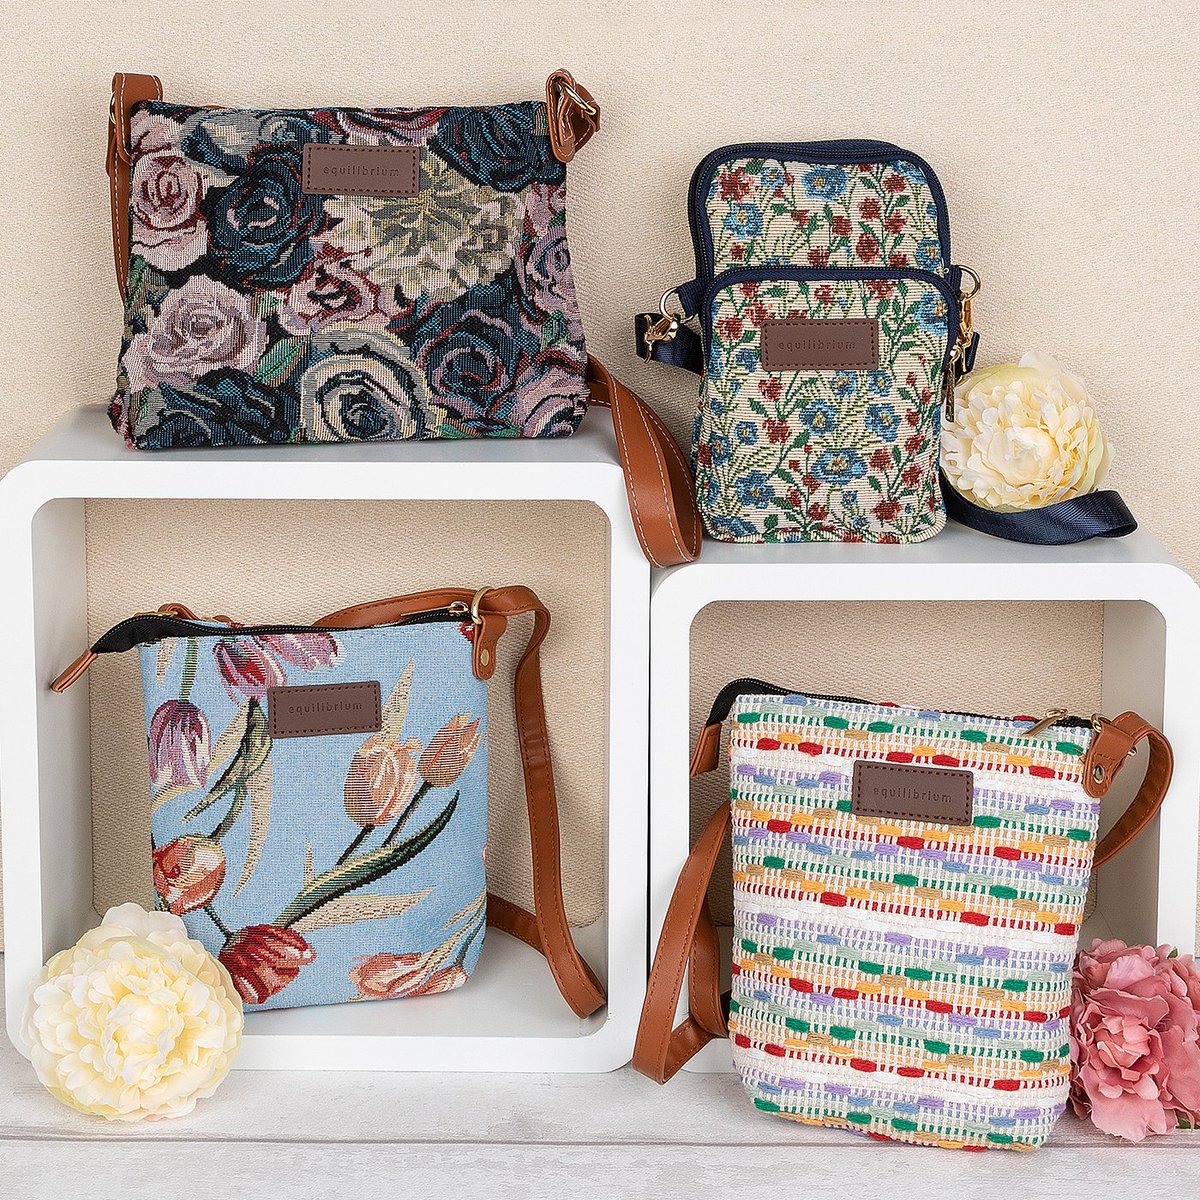 We love our Equilibrium tapestry bags they’re great to wear and are perfect for keeping all your essentials safe.
To see the full range of Equilibrium bags and purses click on the link below;
shop.joedavies.co.uk/range/5415

#joedaviesgifts @joedaviesgifts  #gifts #giftware